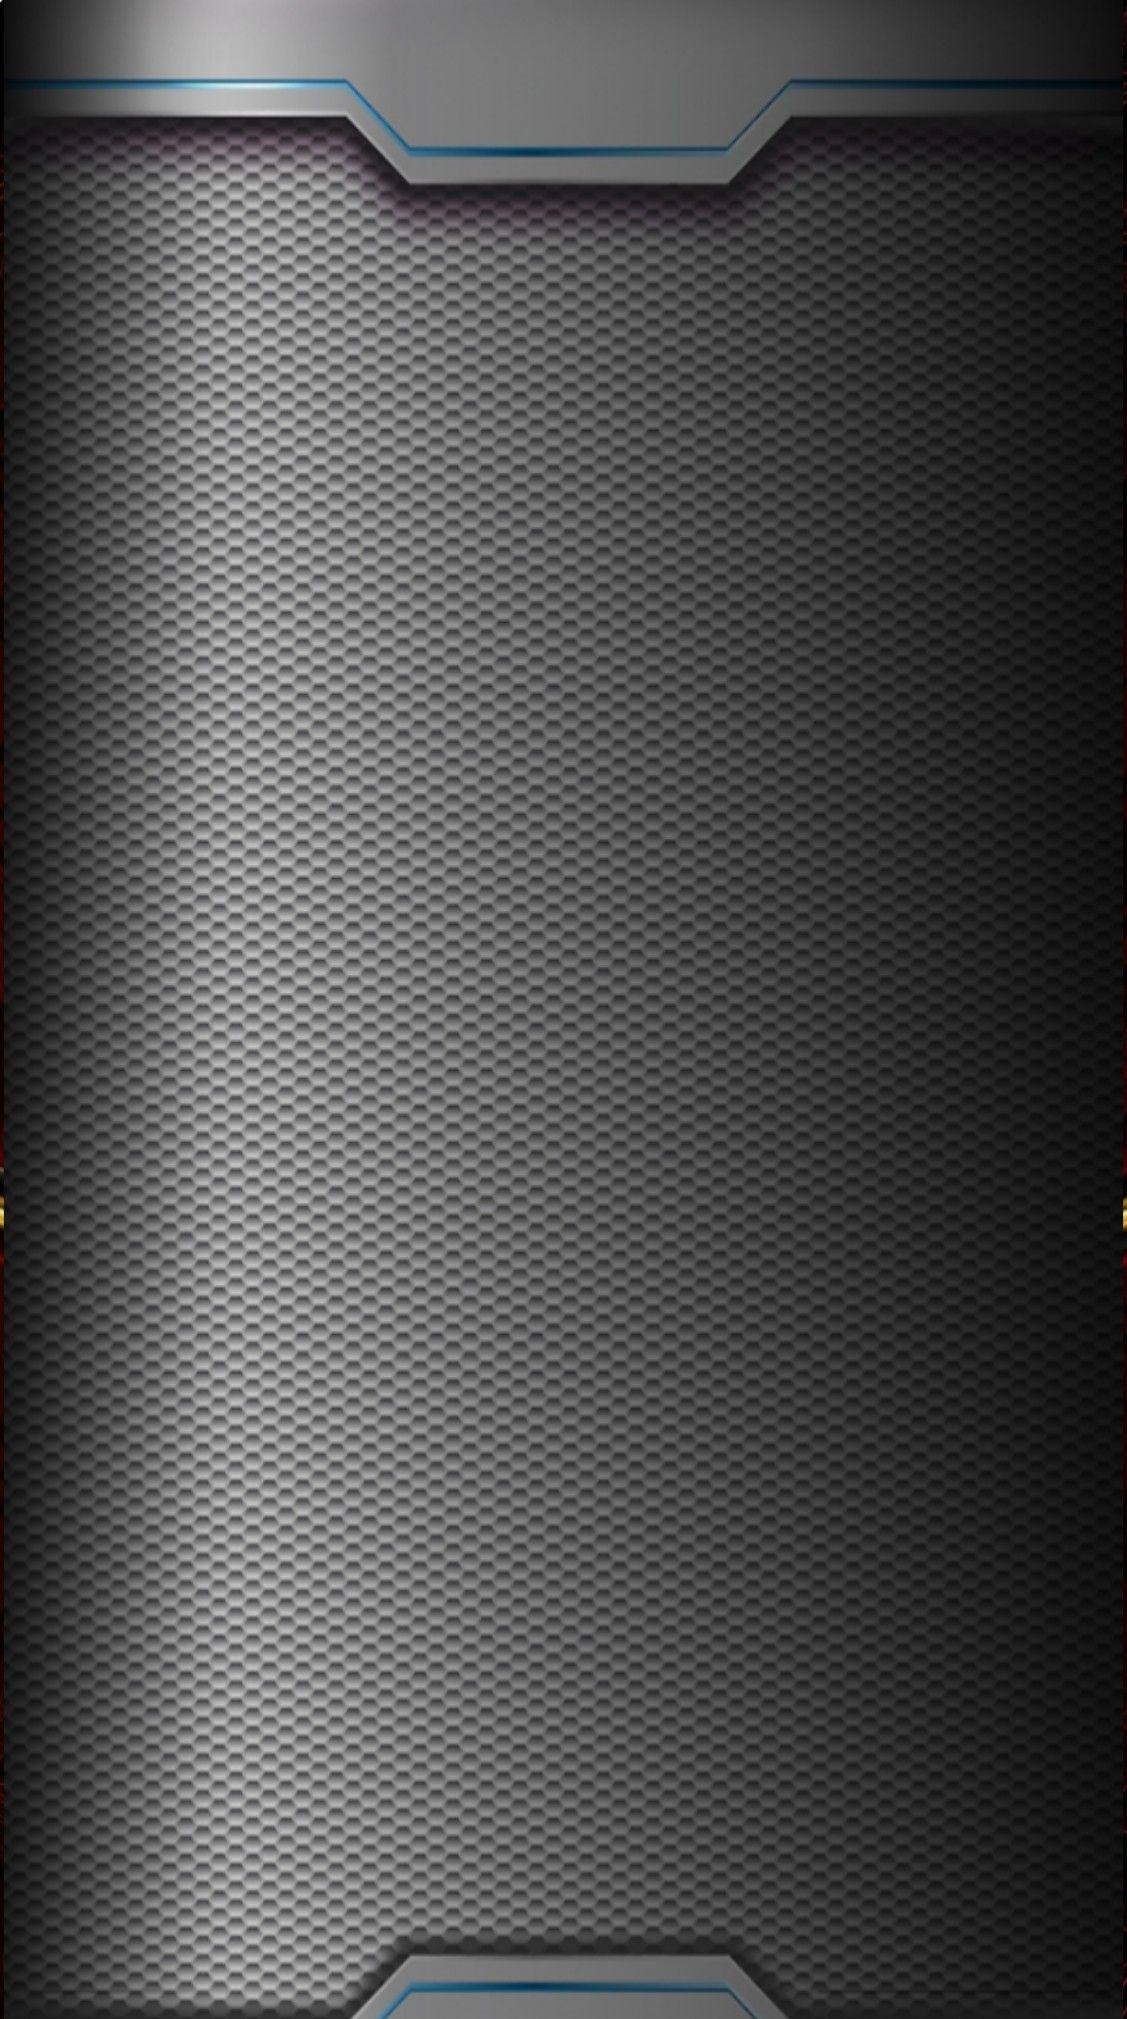 Grey Sleek Wallpaper. *Chrome, Textured, Steel, Suede and Leather